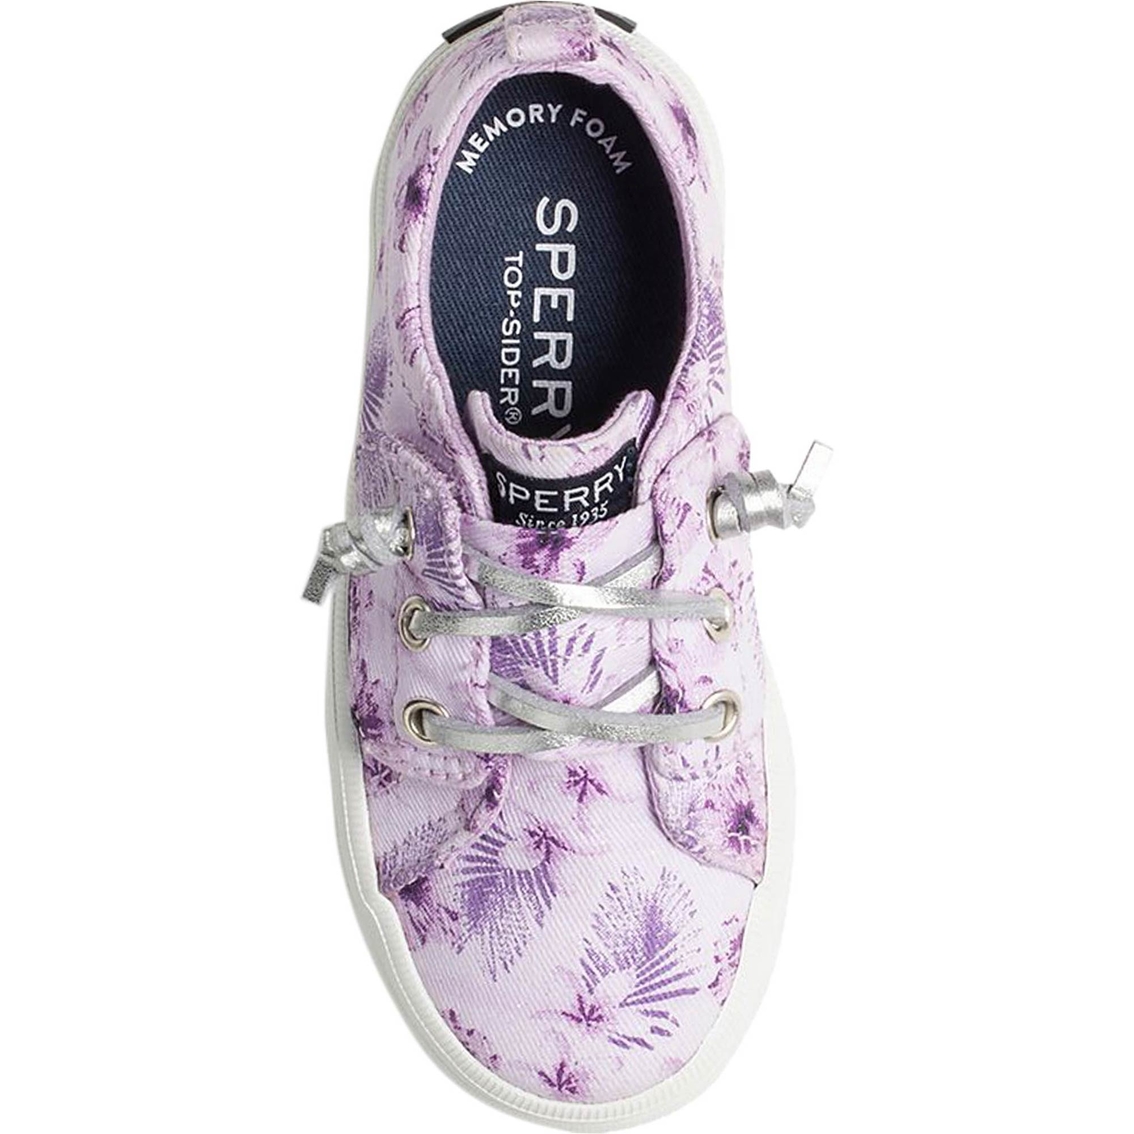 Sperry Toddler Girls Crest Vibe Jr. Sneakers - Image 4 of 6